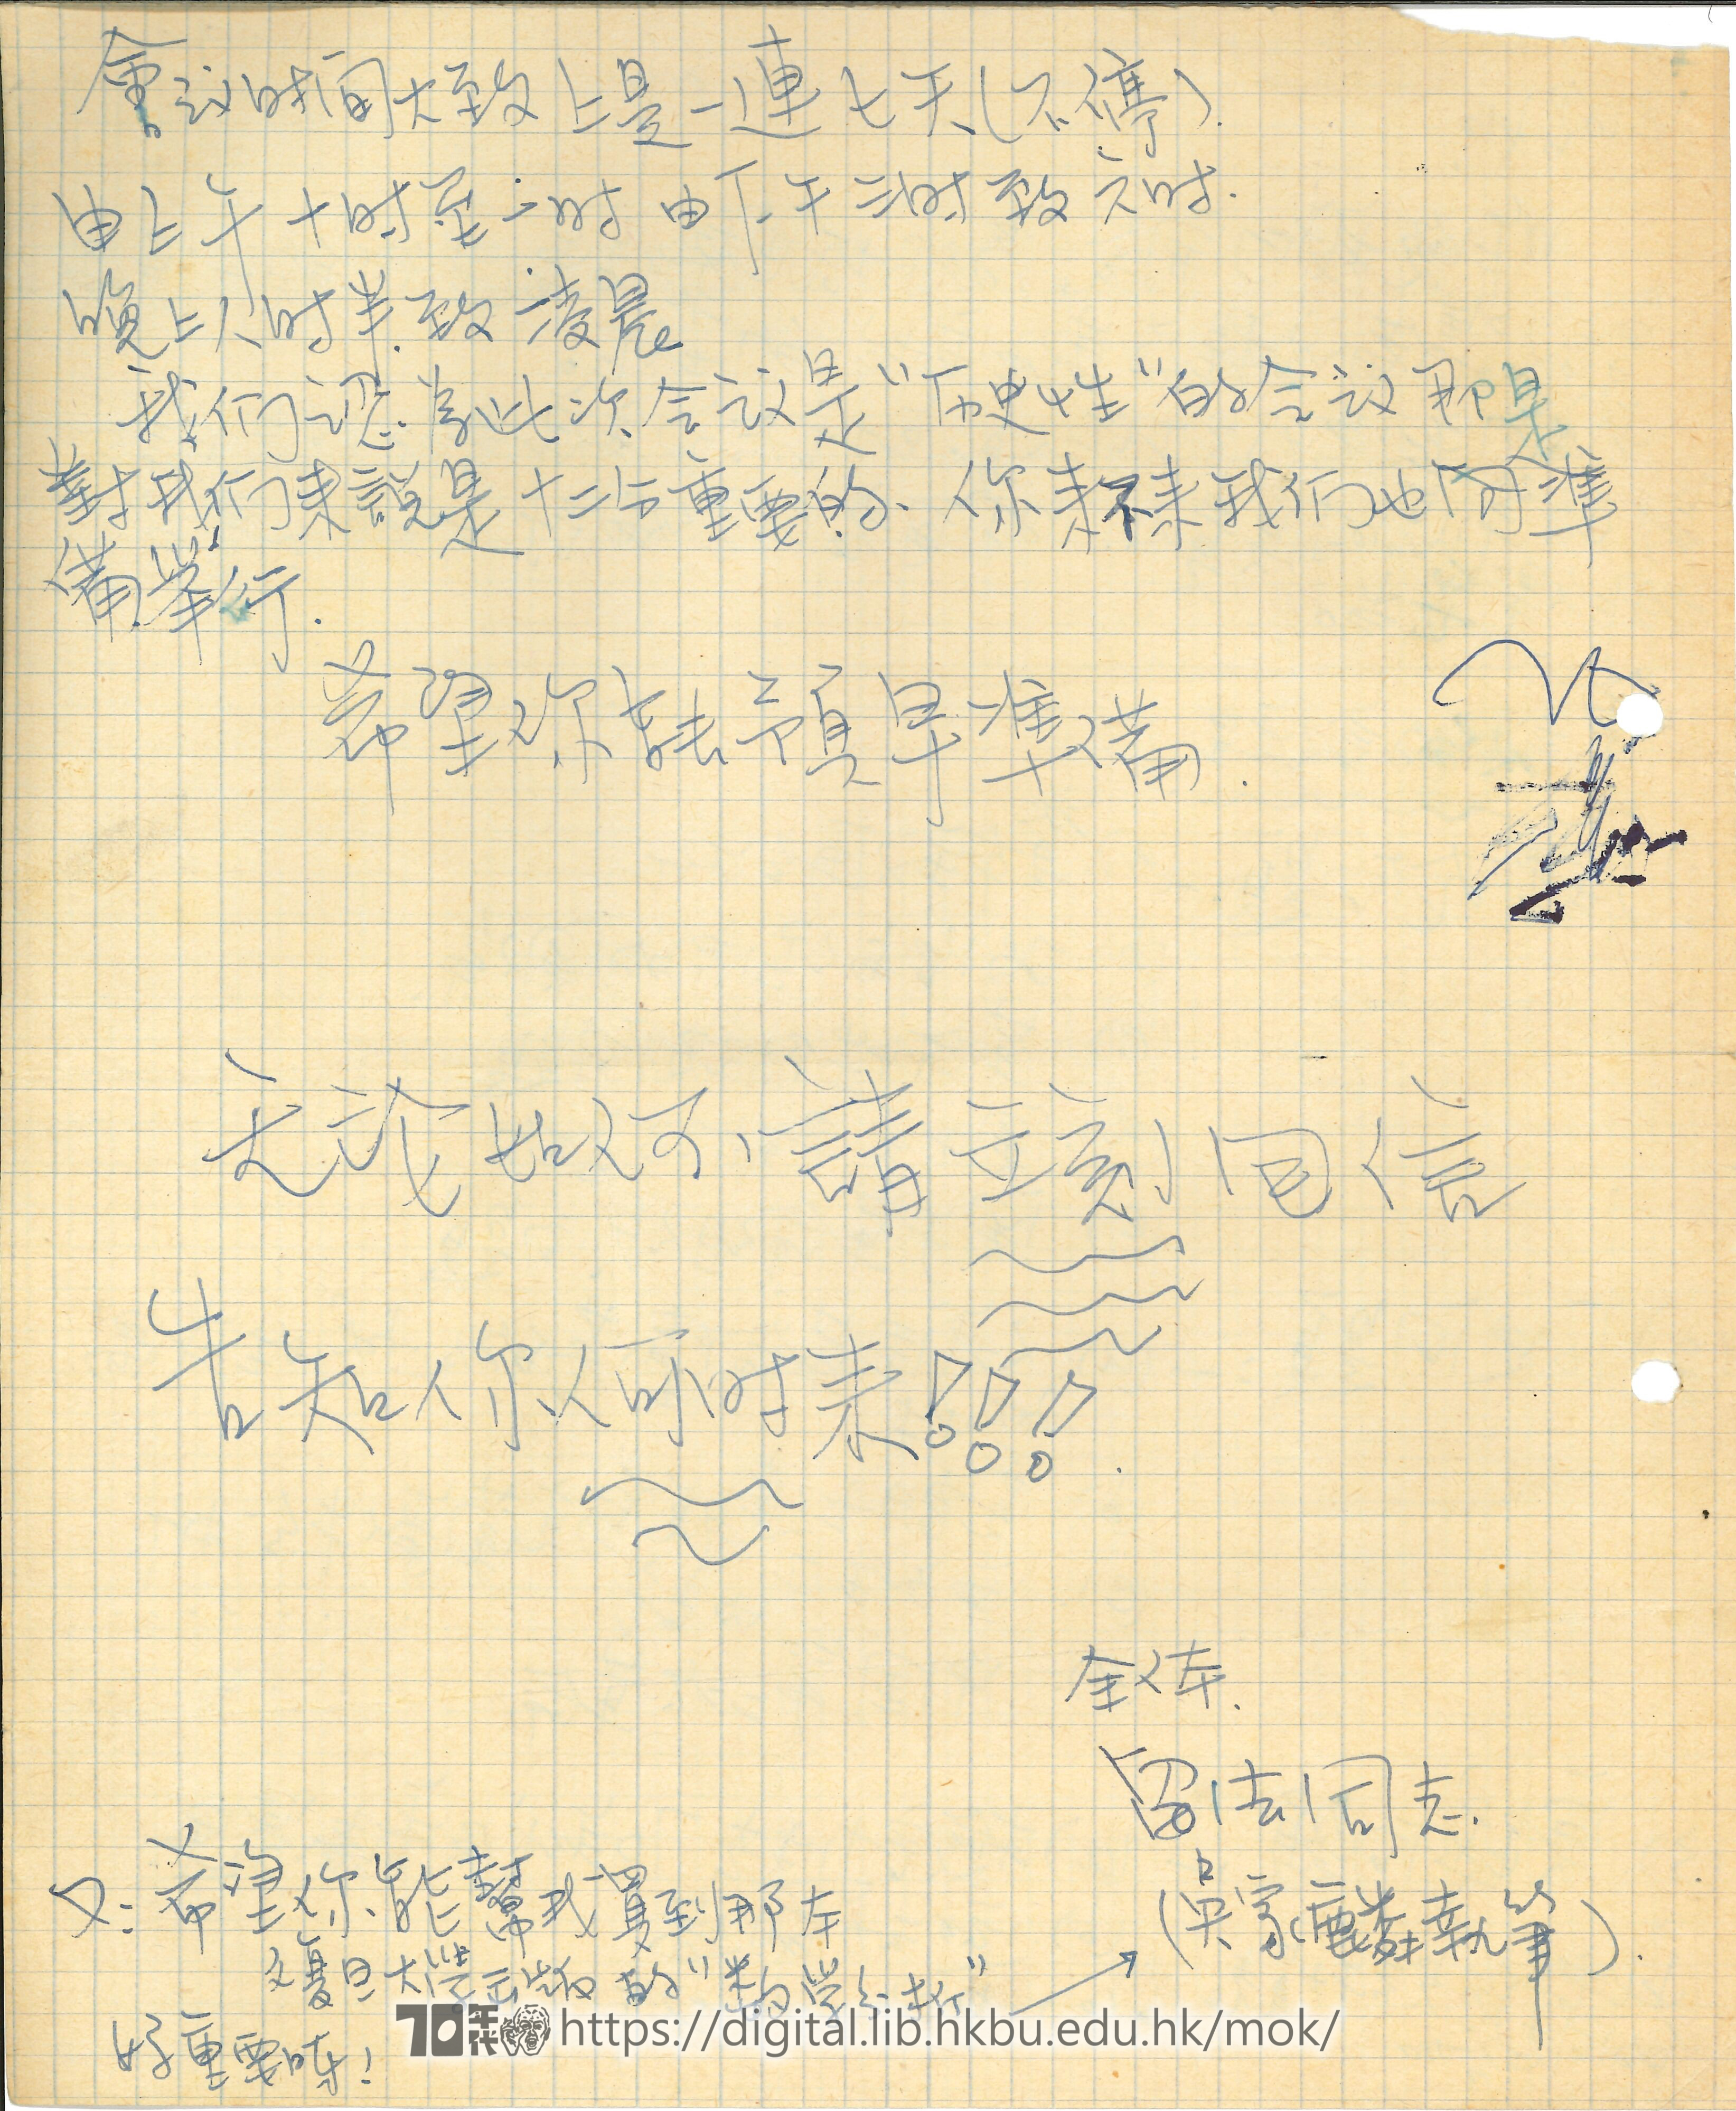   Letter from members in France to Mok Chiu Yu 留法同志 